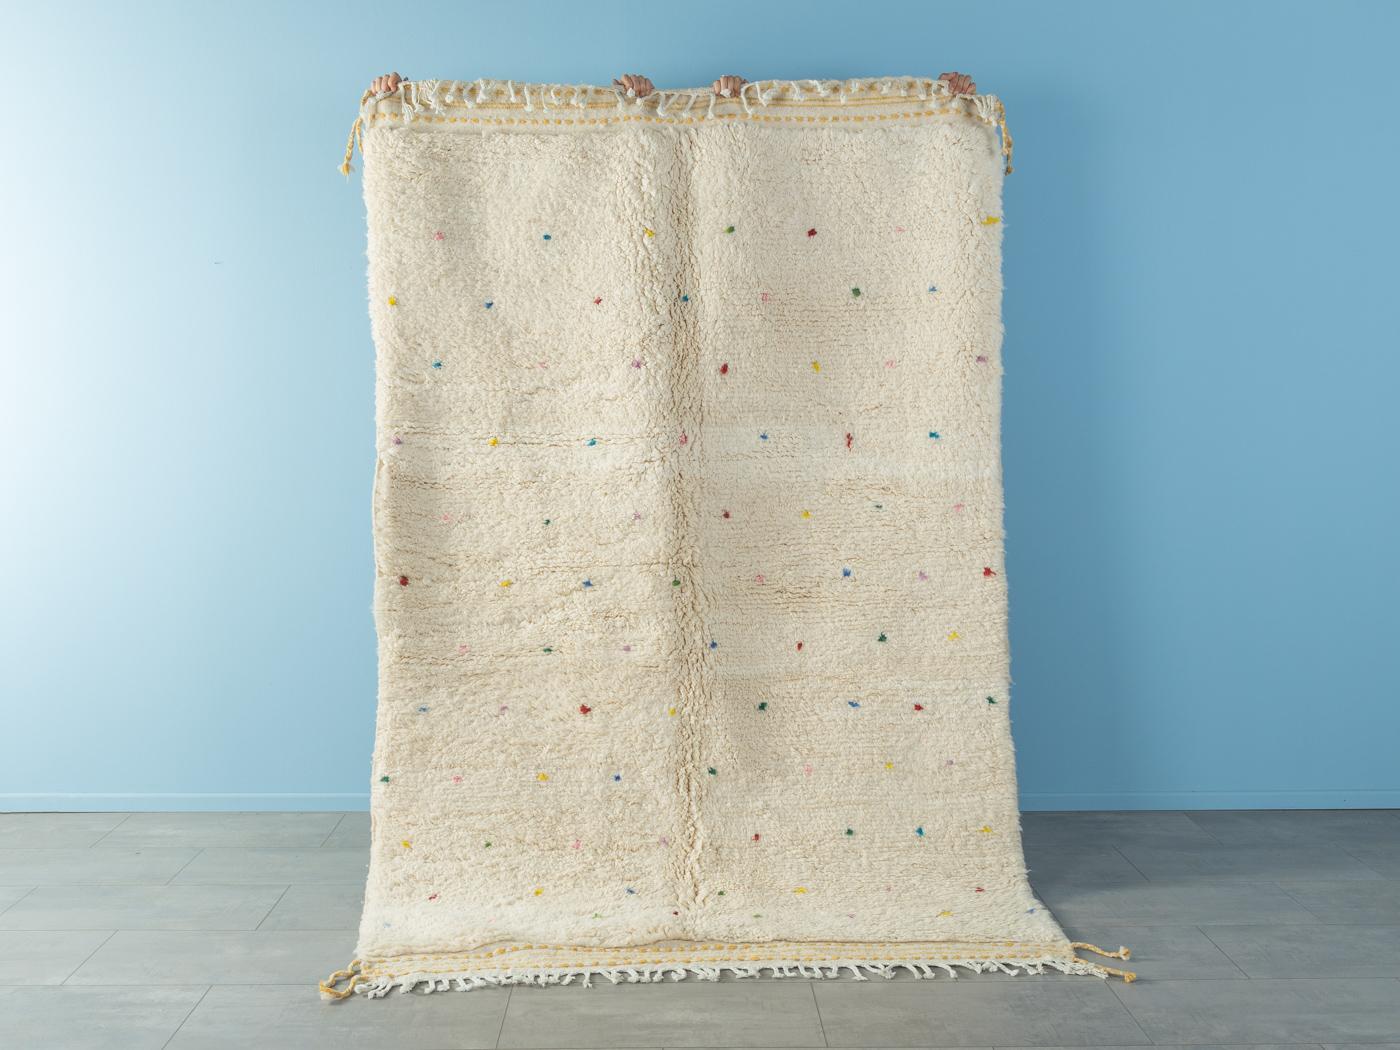 Tiny Polka Dots is a contemporary 100% wool rug – thick and soft, comfortable underfoot. Our Berber rugs are handwoven and handknotted by Amazigh women in the Atlas Mountains. These communities have been crafting rugs for thousands of years. One